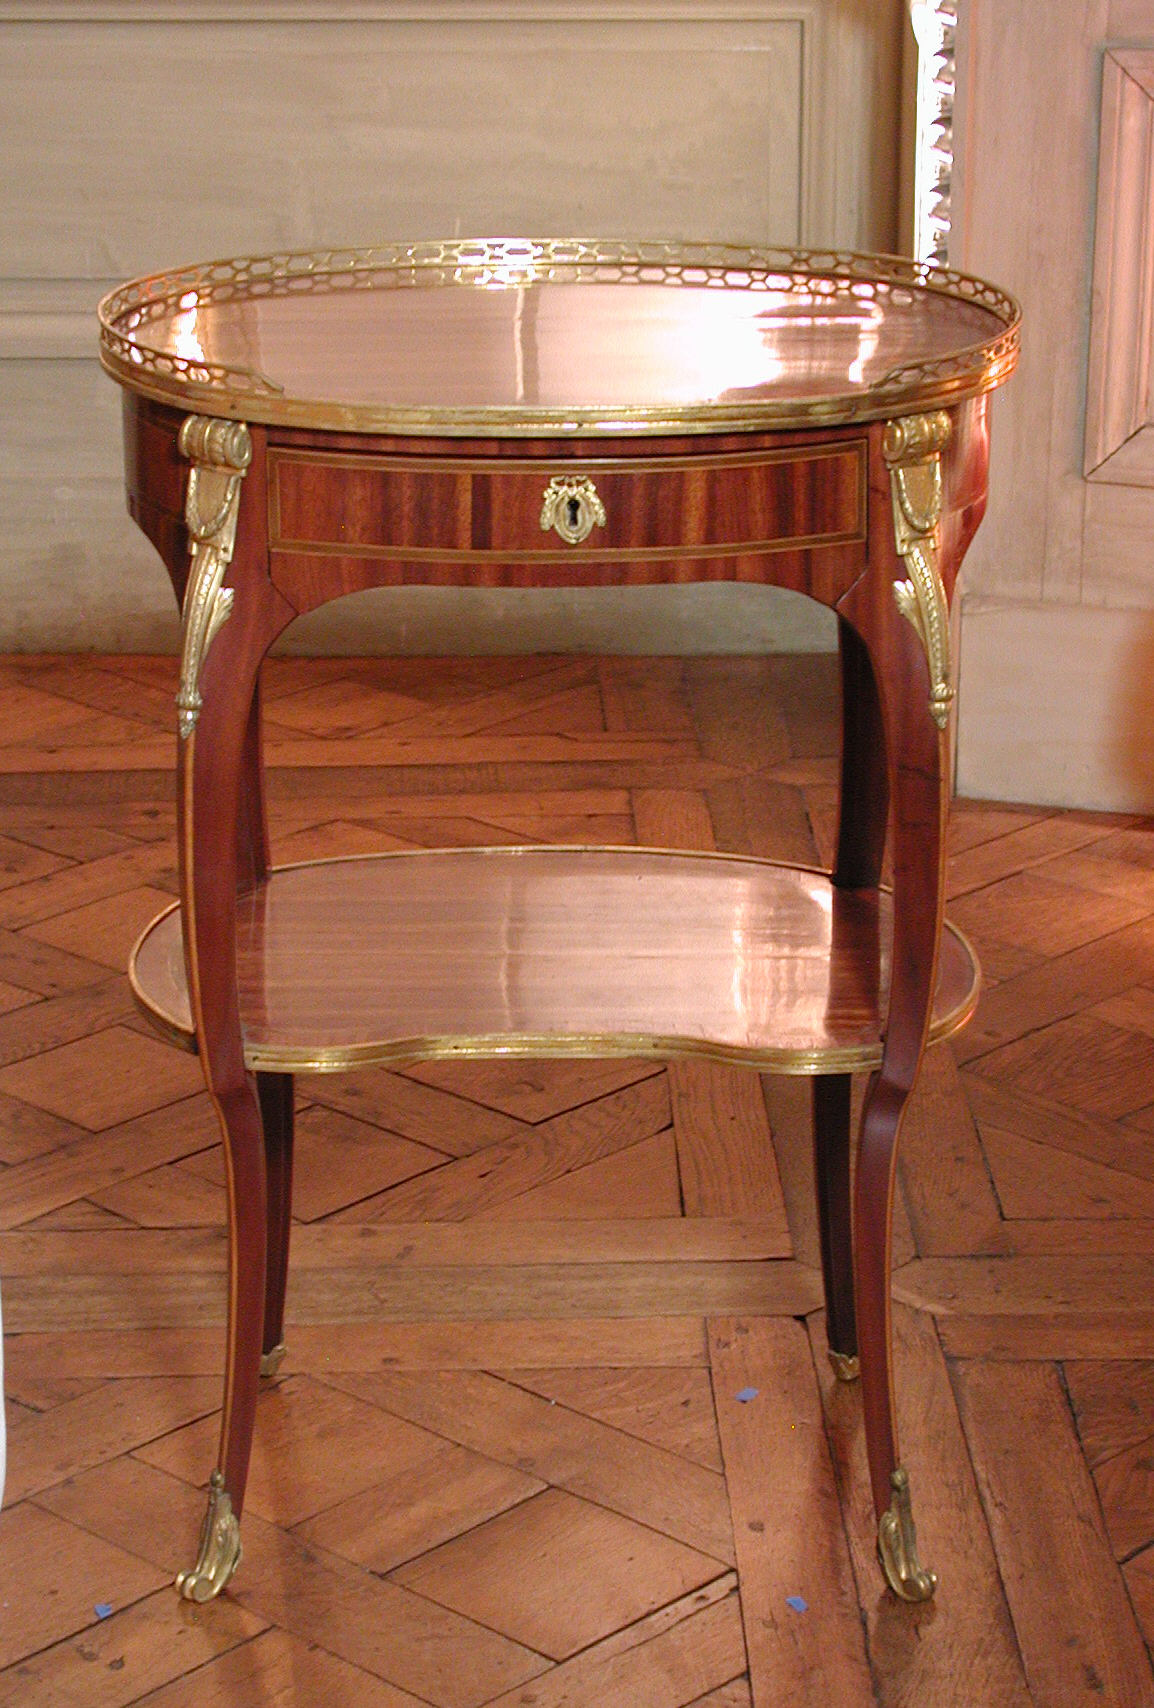 of French, Art Roger | Lacroix table | | a Metropolitan The of Small Vandercruse, oval Paris pair) (one writing called Museum